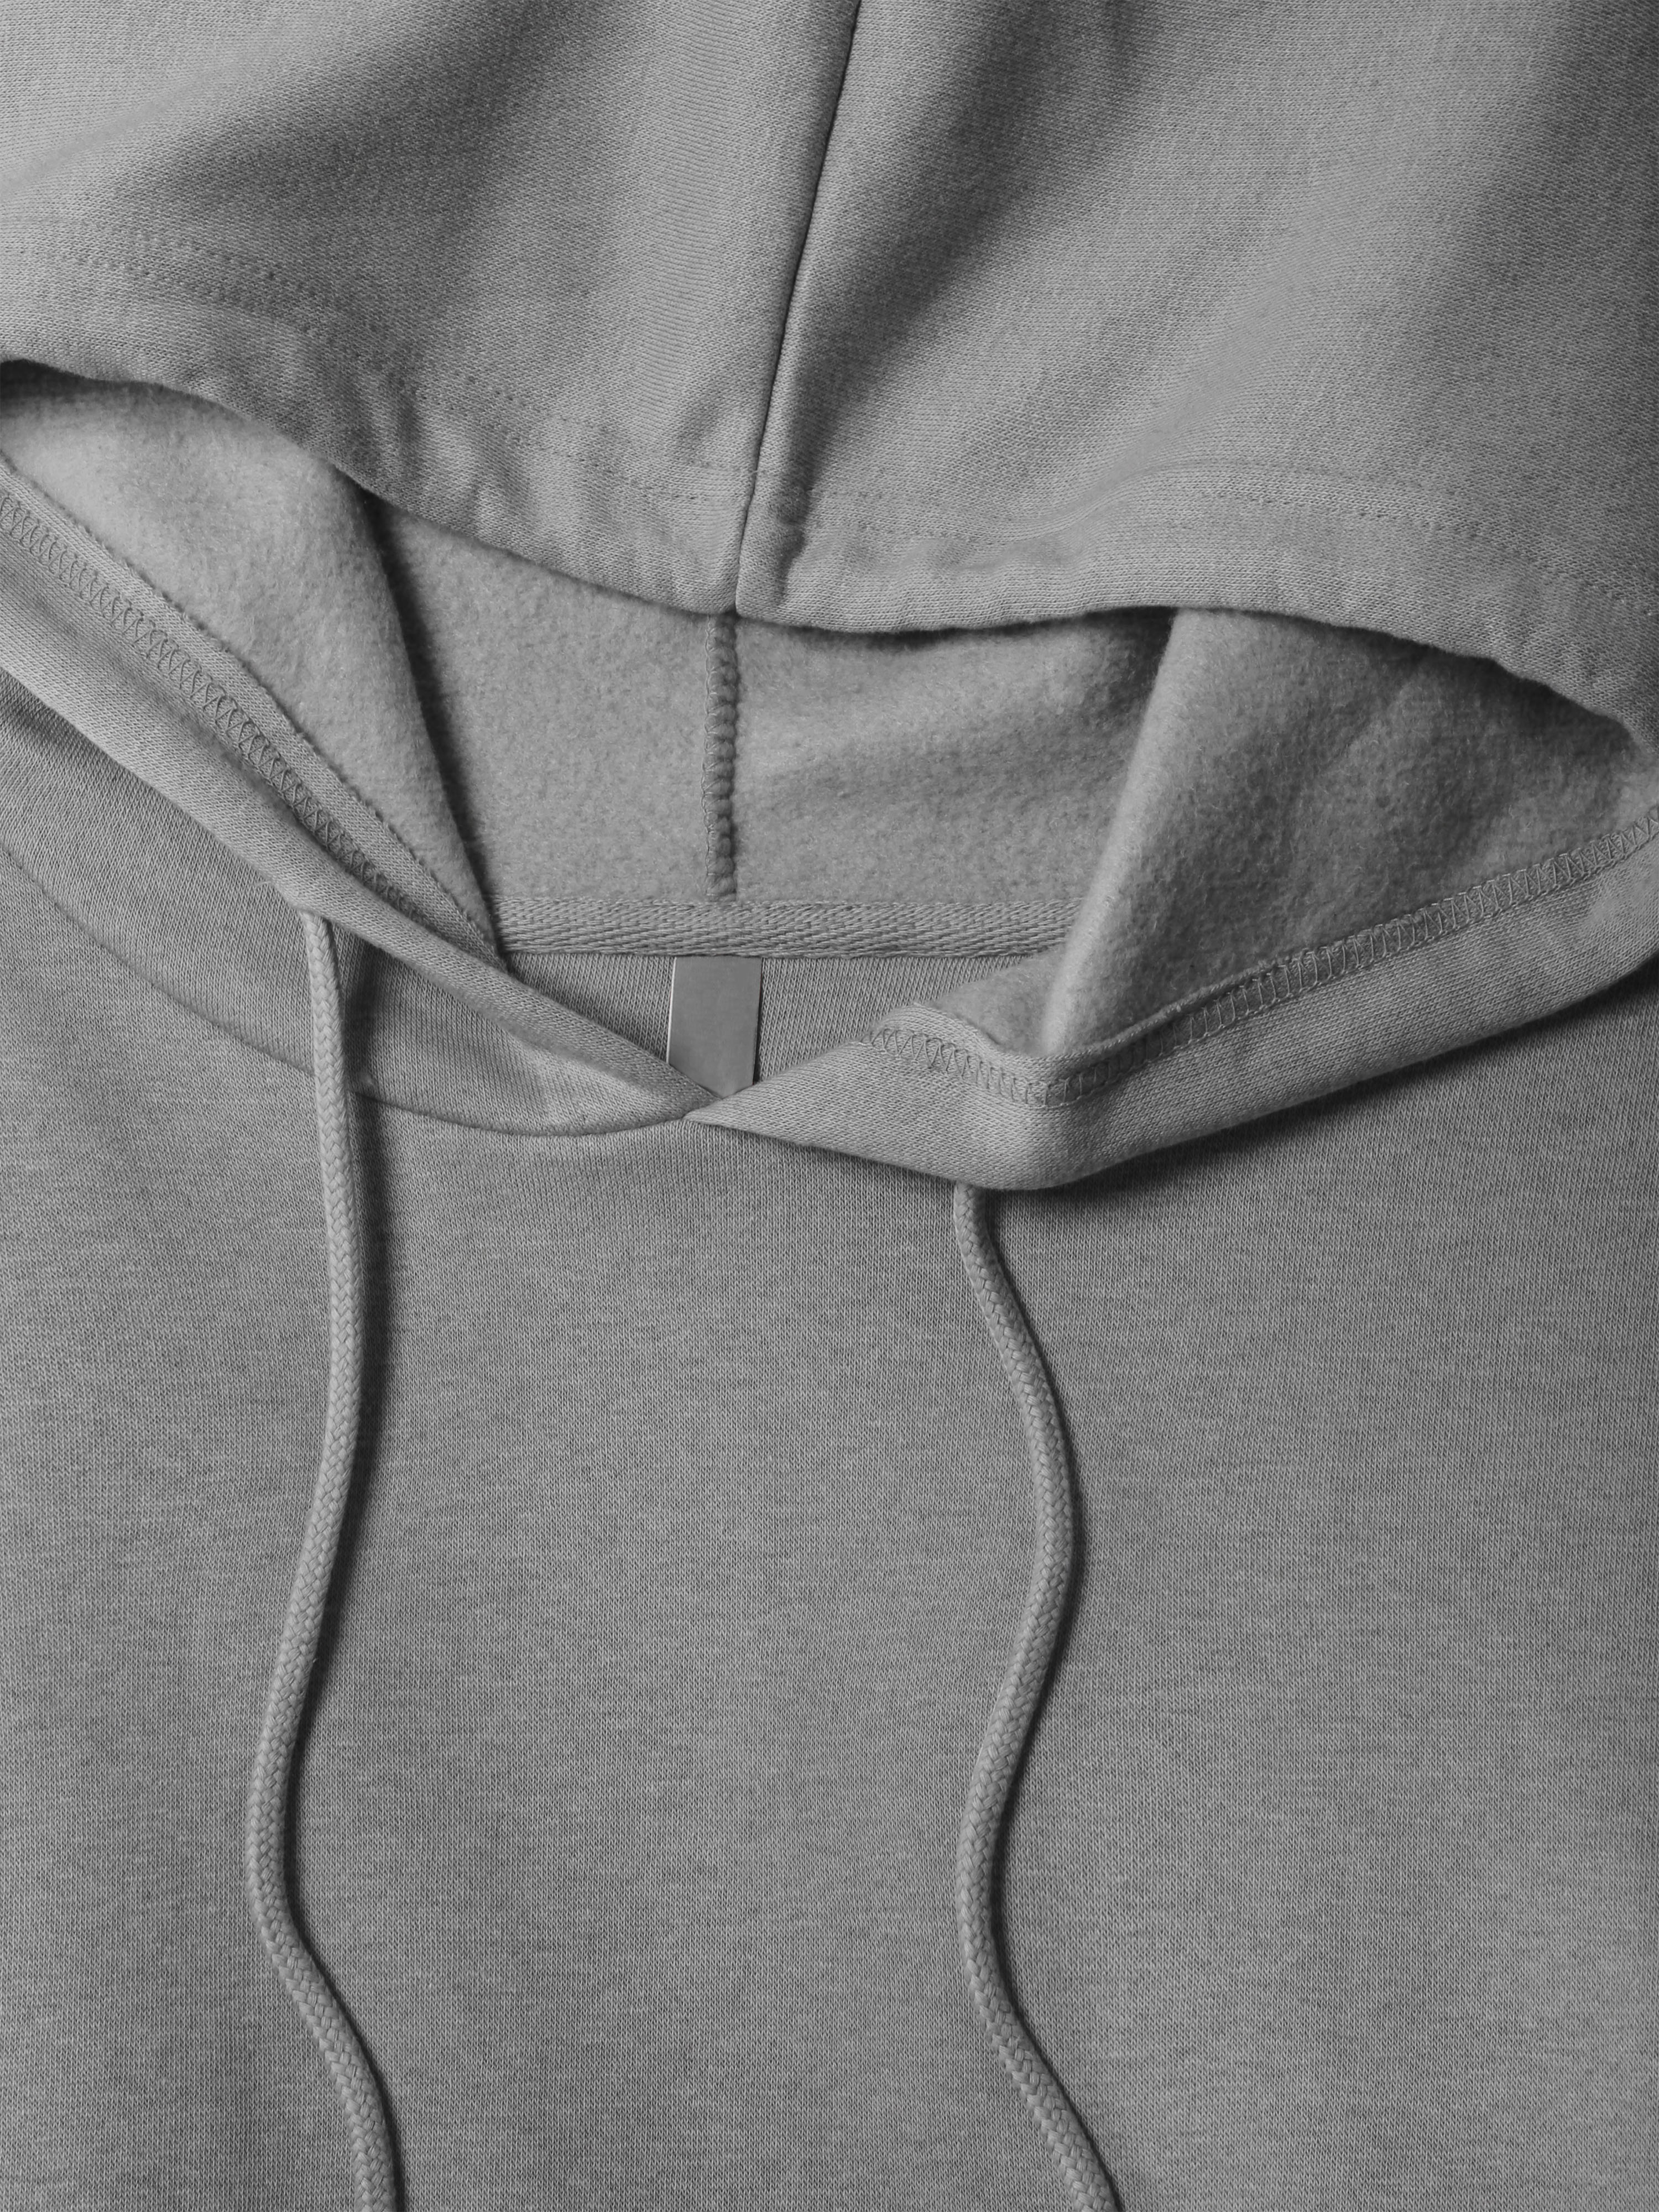 Ma Croix Mens Pullover Hoodie Ultra Soft Fleece Lined Cotton Hooded Sweatshirt With Lycra Ribbing For Performance - image 3 of 6